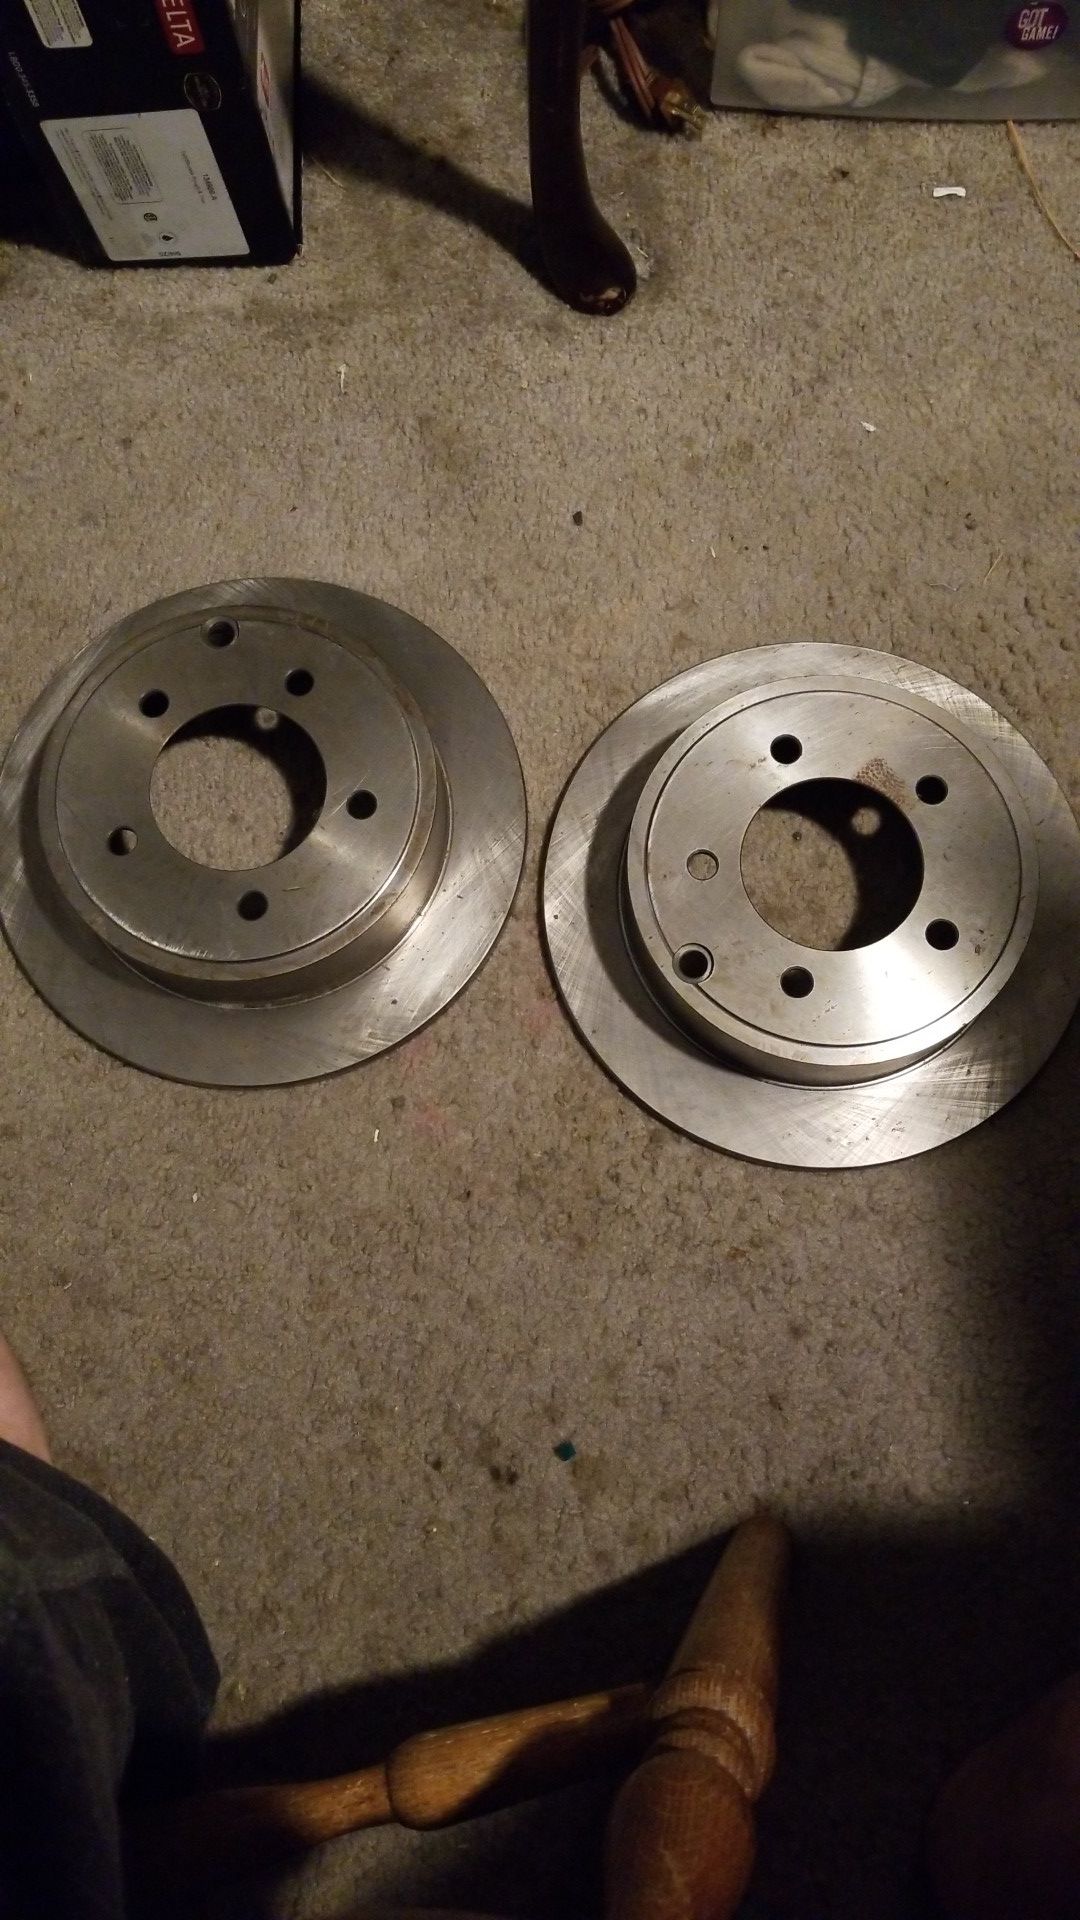 2 new rotors for 2014 Jeep Compass ( small rust spot from sitting, new)